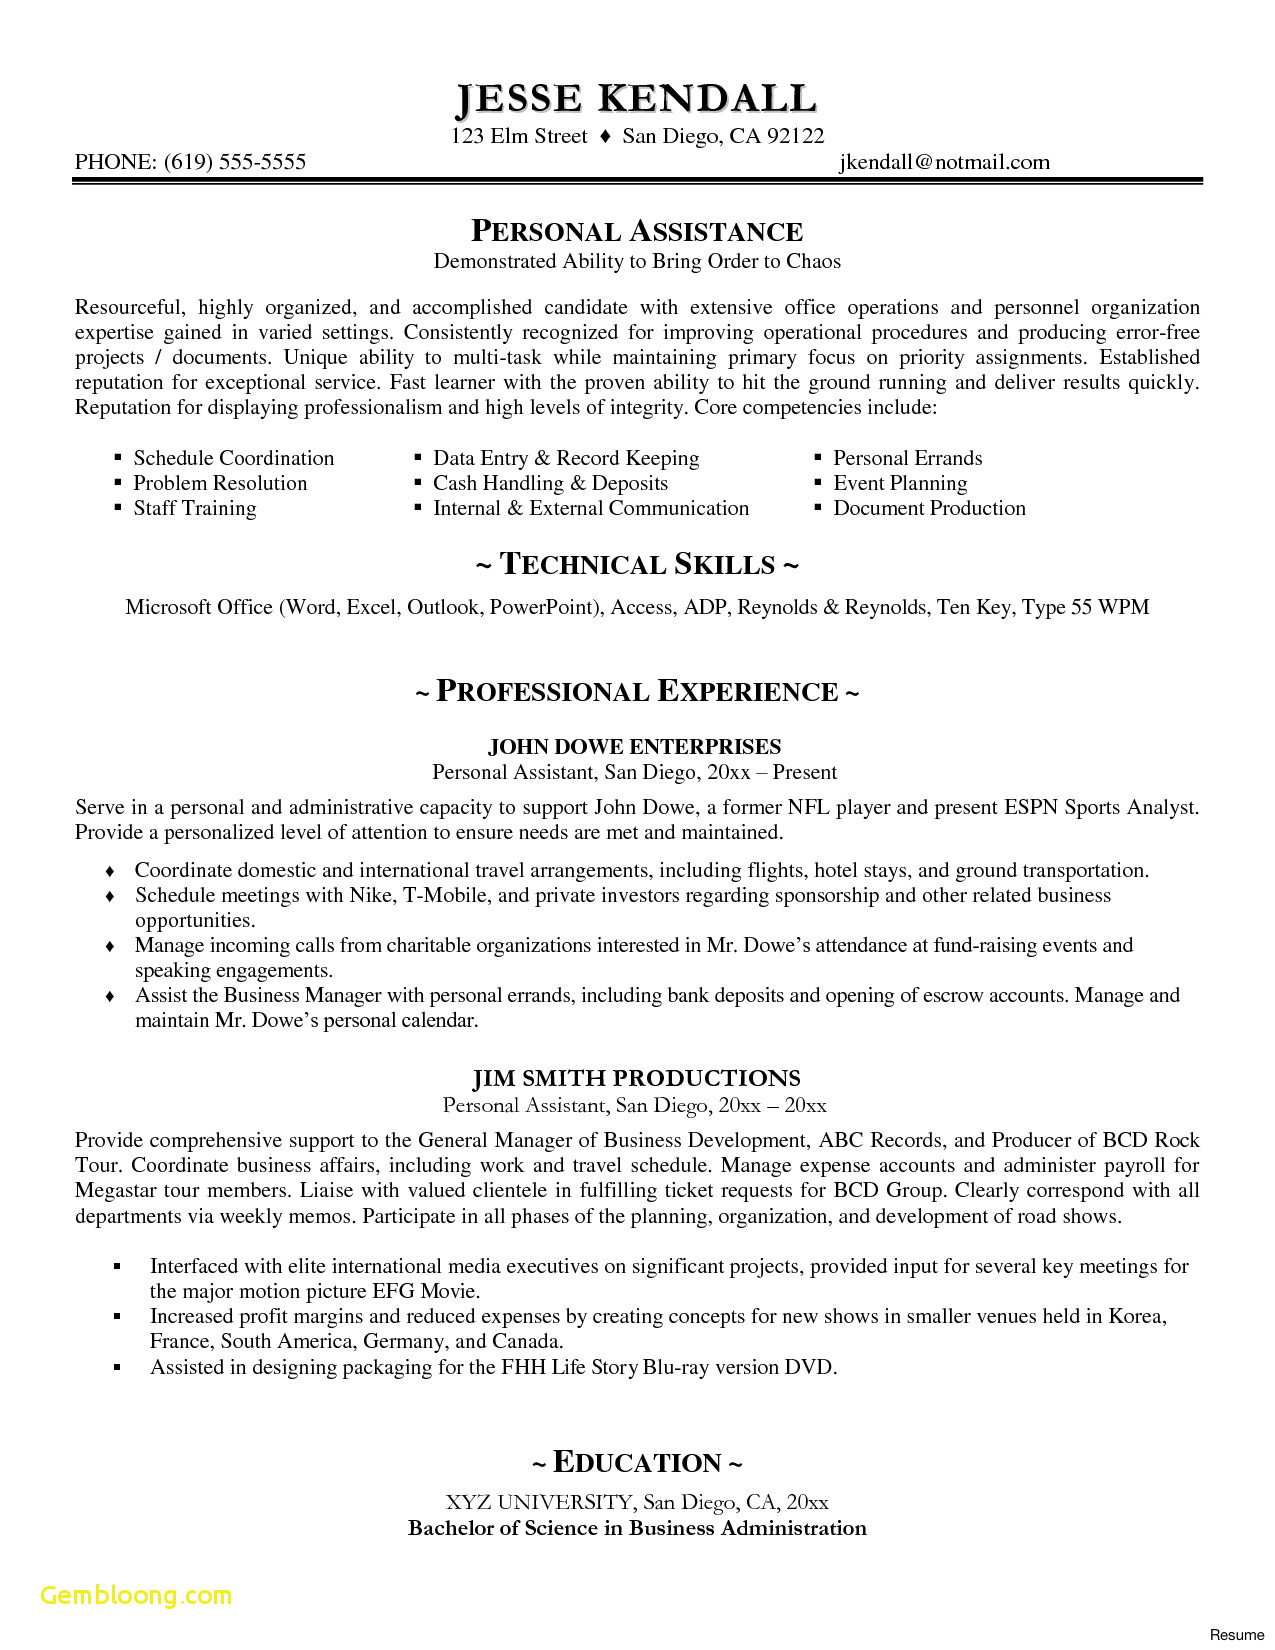 Media Cover Letter Template - Resume Samples Doc New Executive Resume Templates Word Od Specialist